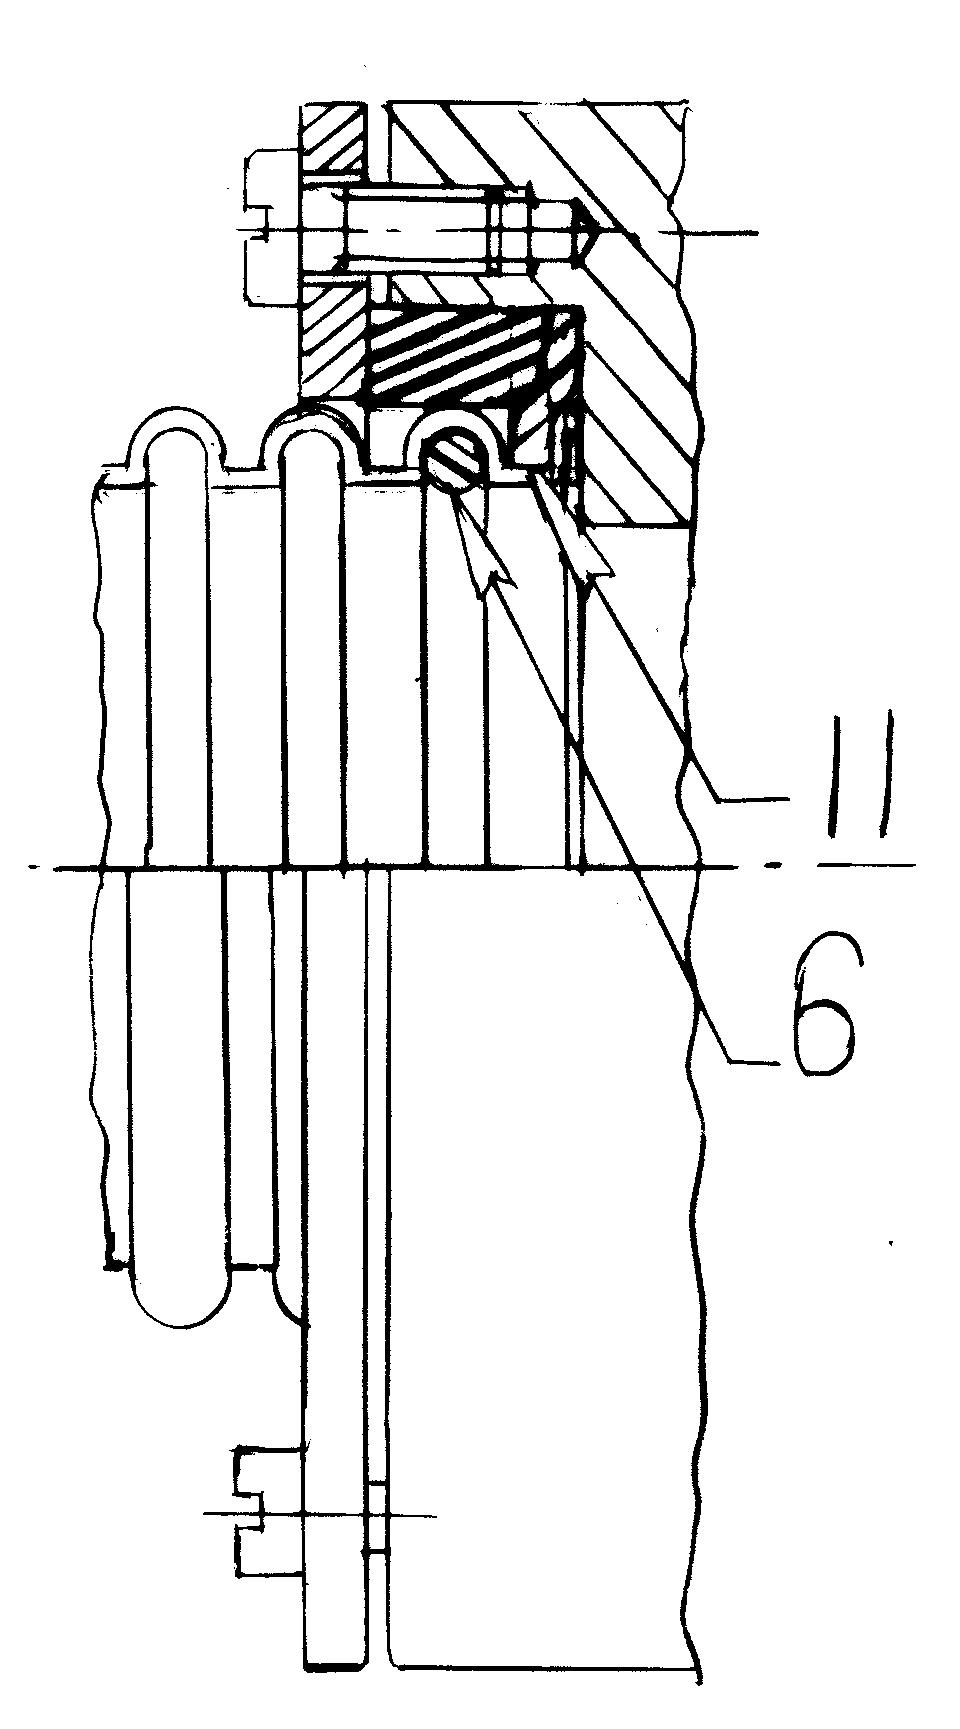 Fig.14A